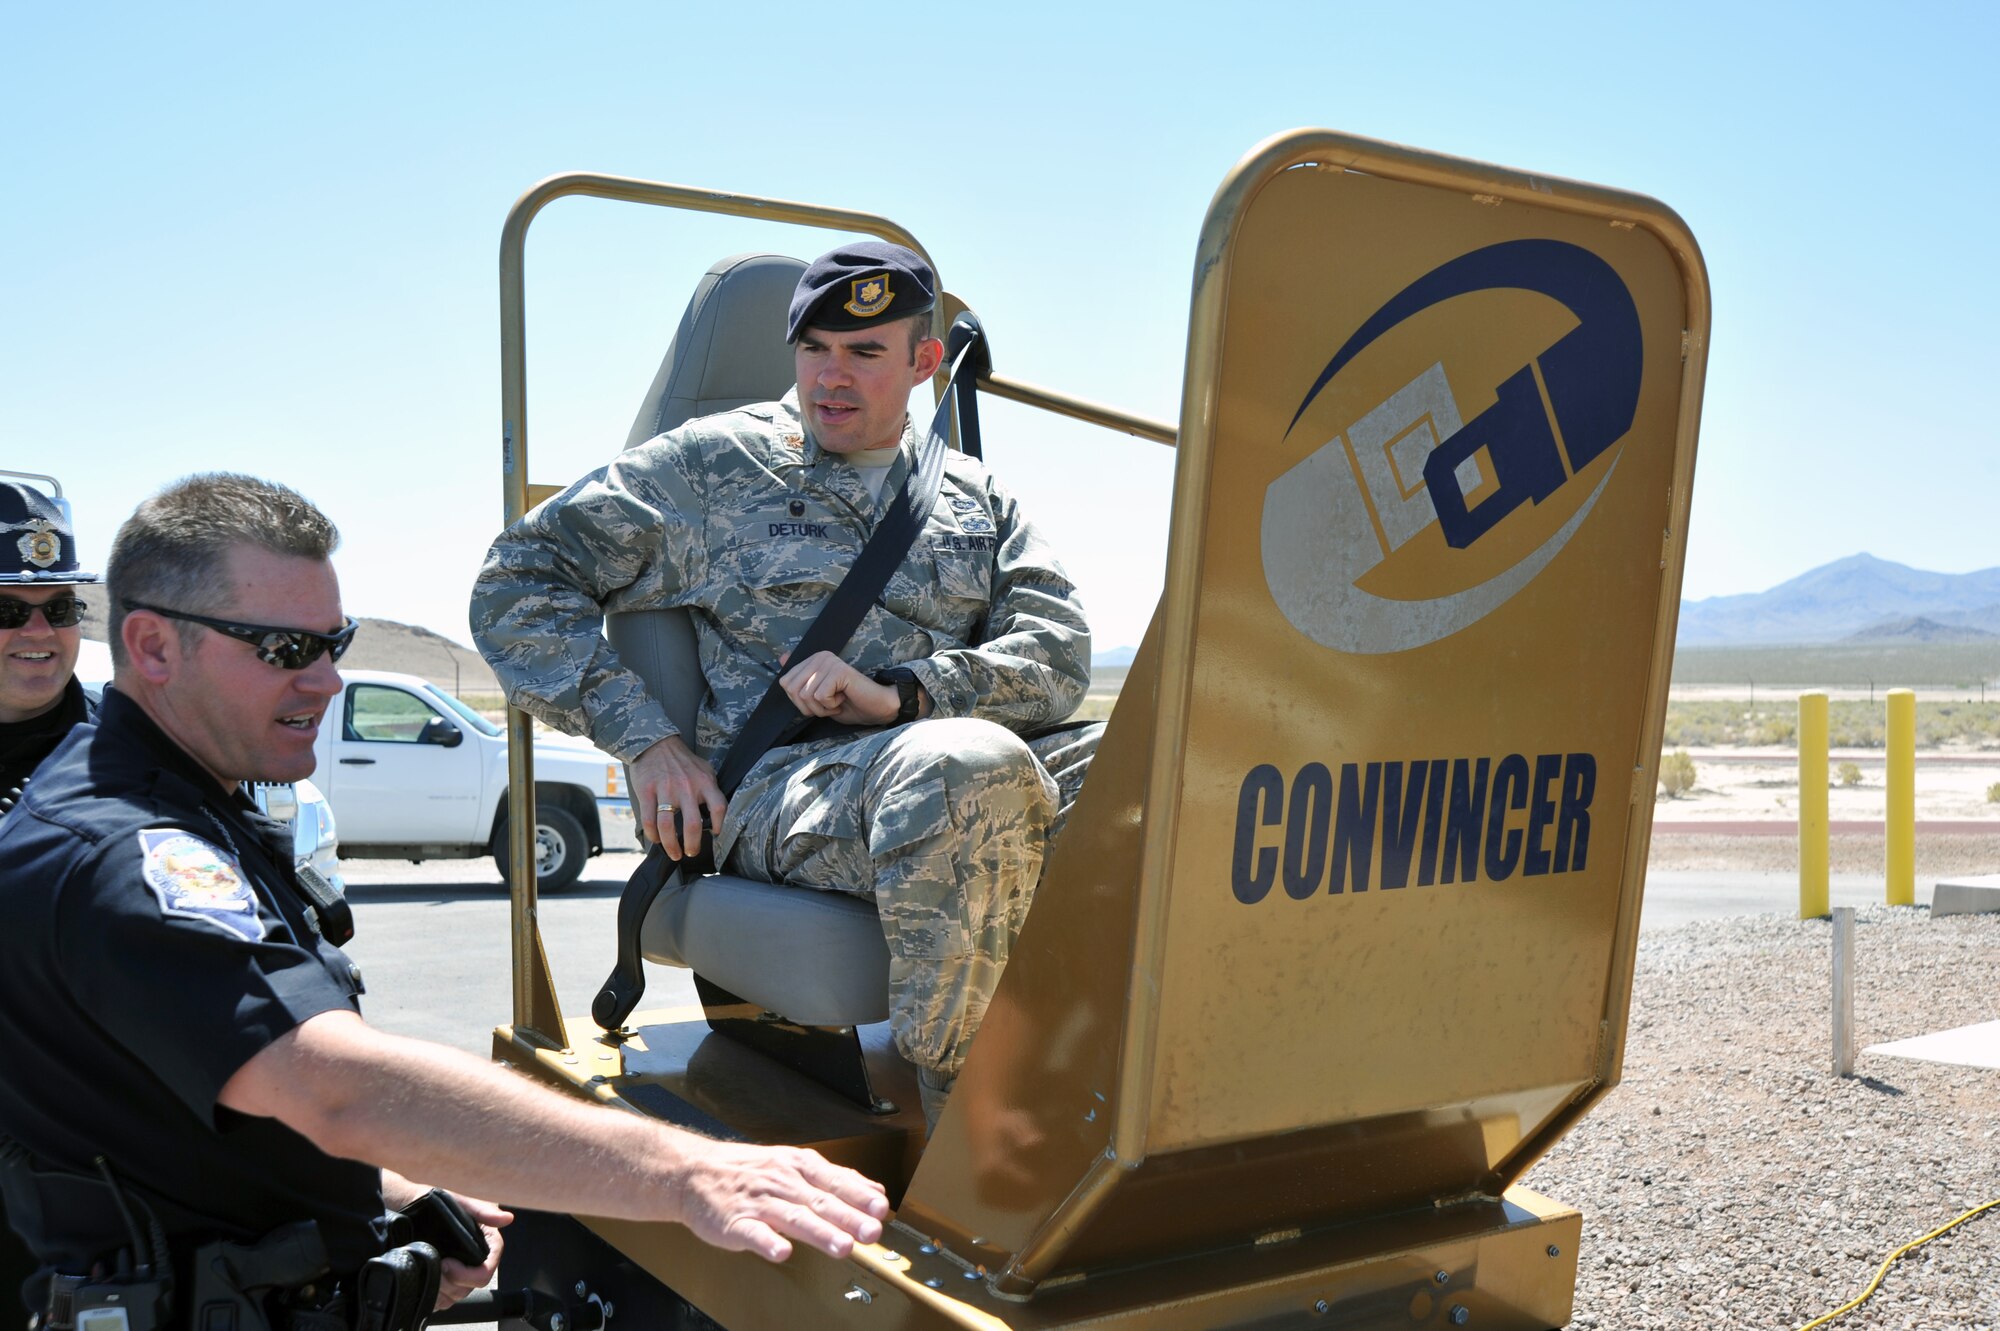 Nevada State Trooper Jeremie Elliott explains the purpose of The Convincer to Maj. Eric Deturk, 799th Security Forces Squadron commander, during an equipment display at Creech Air Force Base as part of Police Week May 14, 2014. The Convincer simulates a 5 mph accident so an individual can feel the safety belt stop their momentum to put into perspective that higher speed accidents will hit harder. (U.S. Air Force photo by Tech. Sgt. S.E./Released)